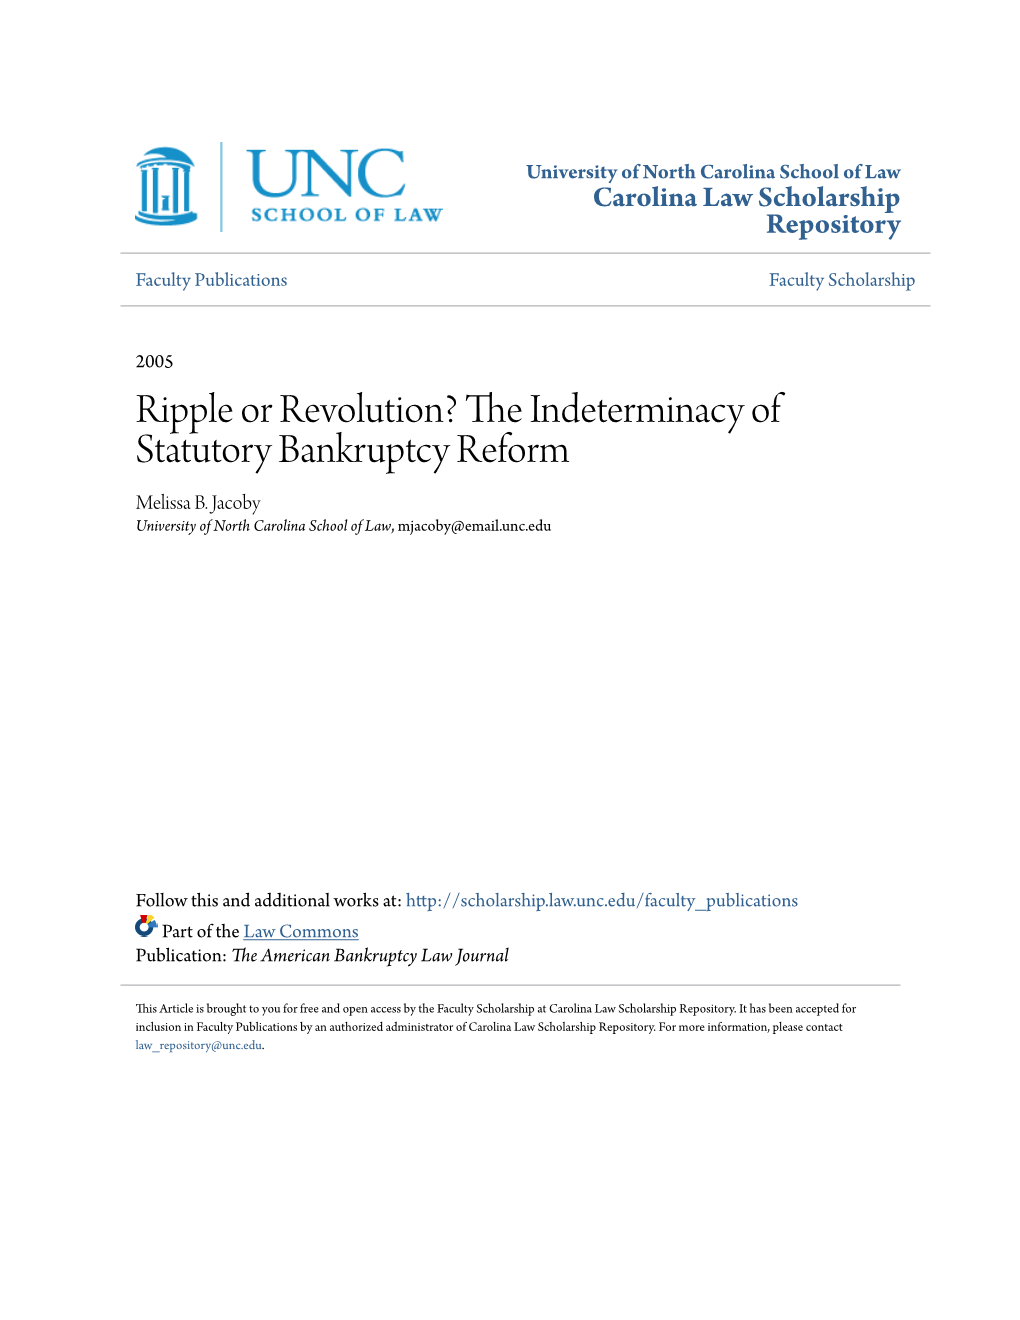 Ripple Or Revolution? the Indeterminacy of Statutory Bankruptcy Reform